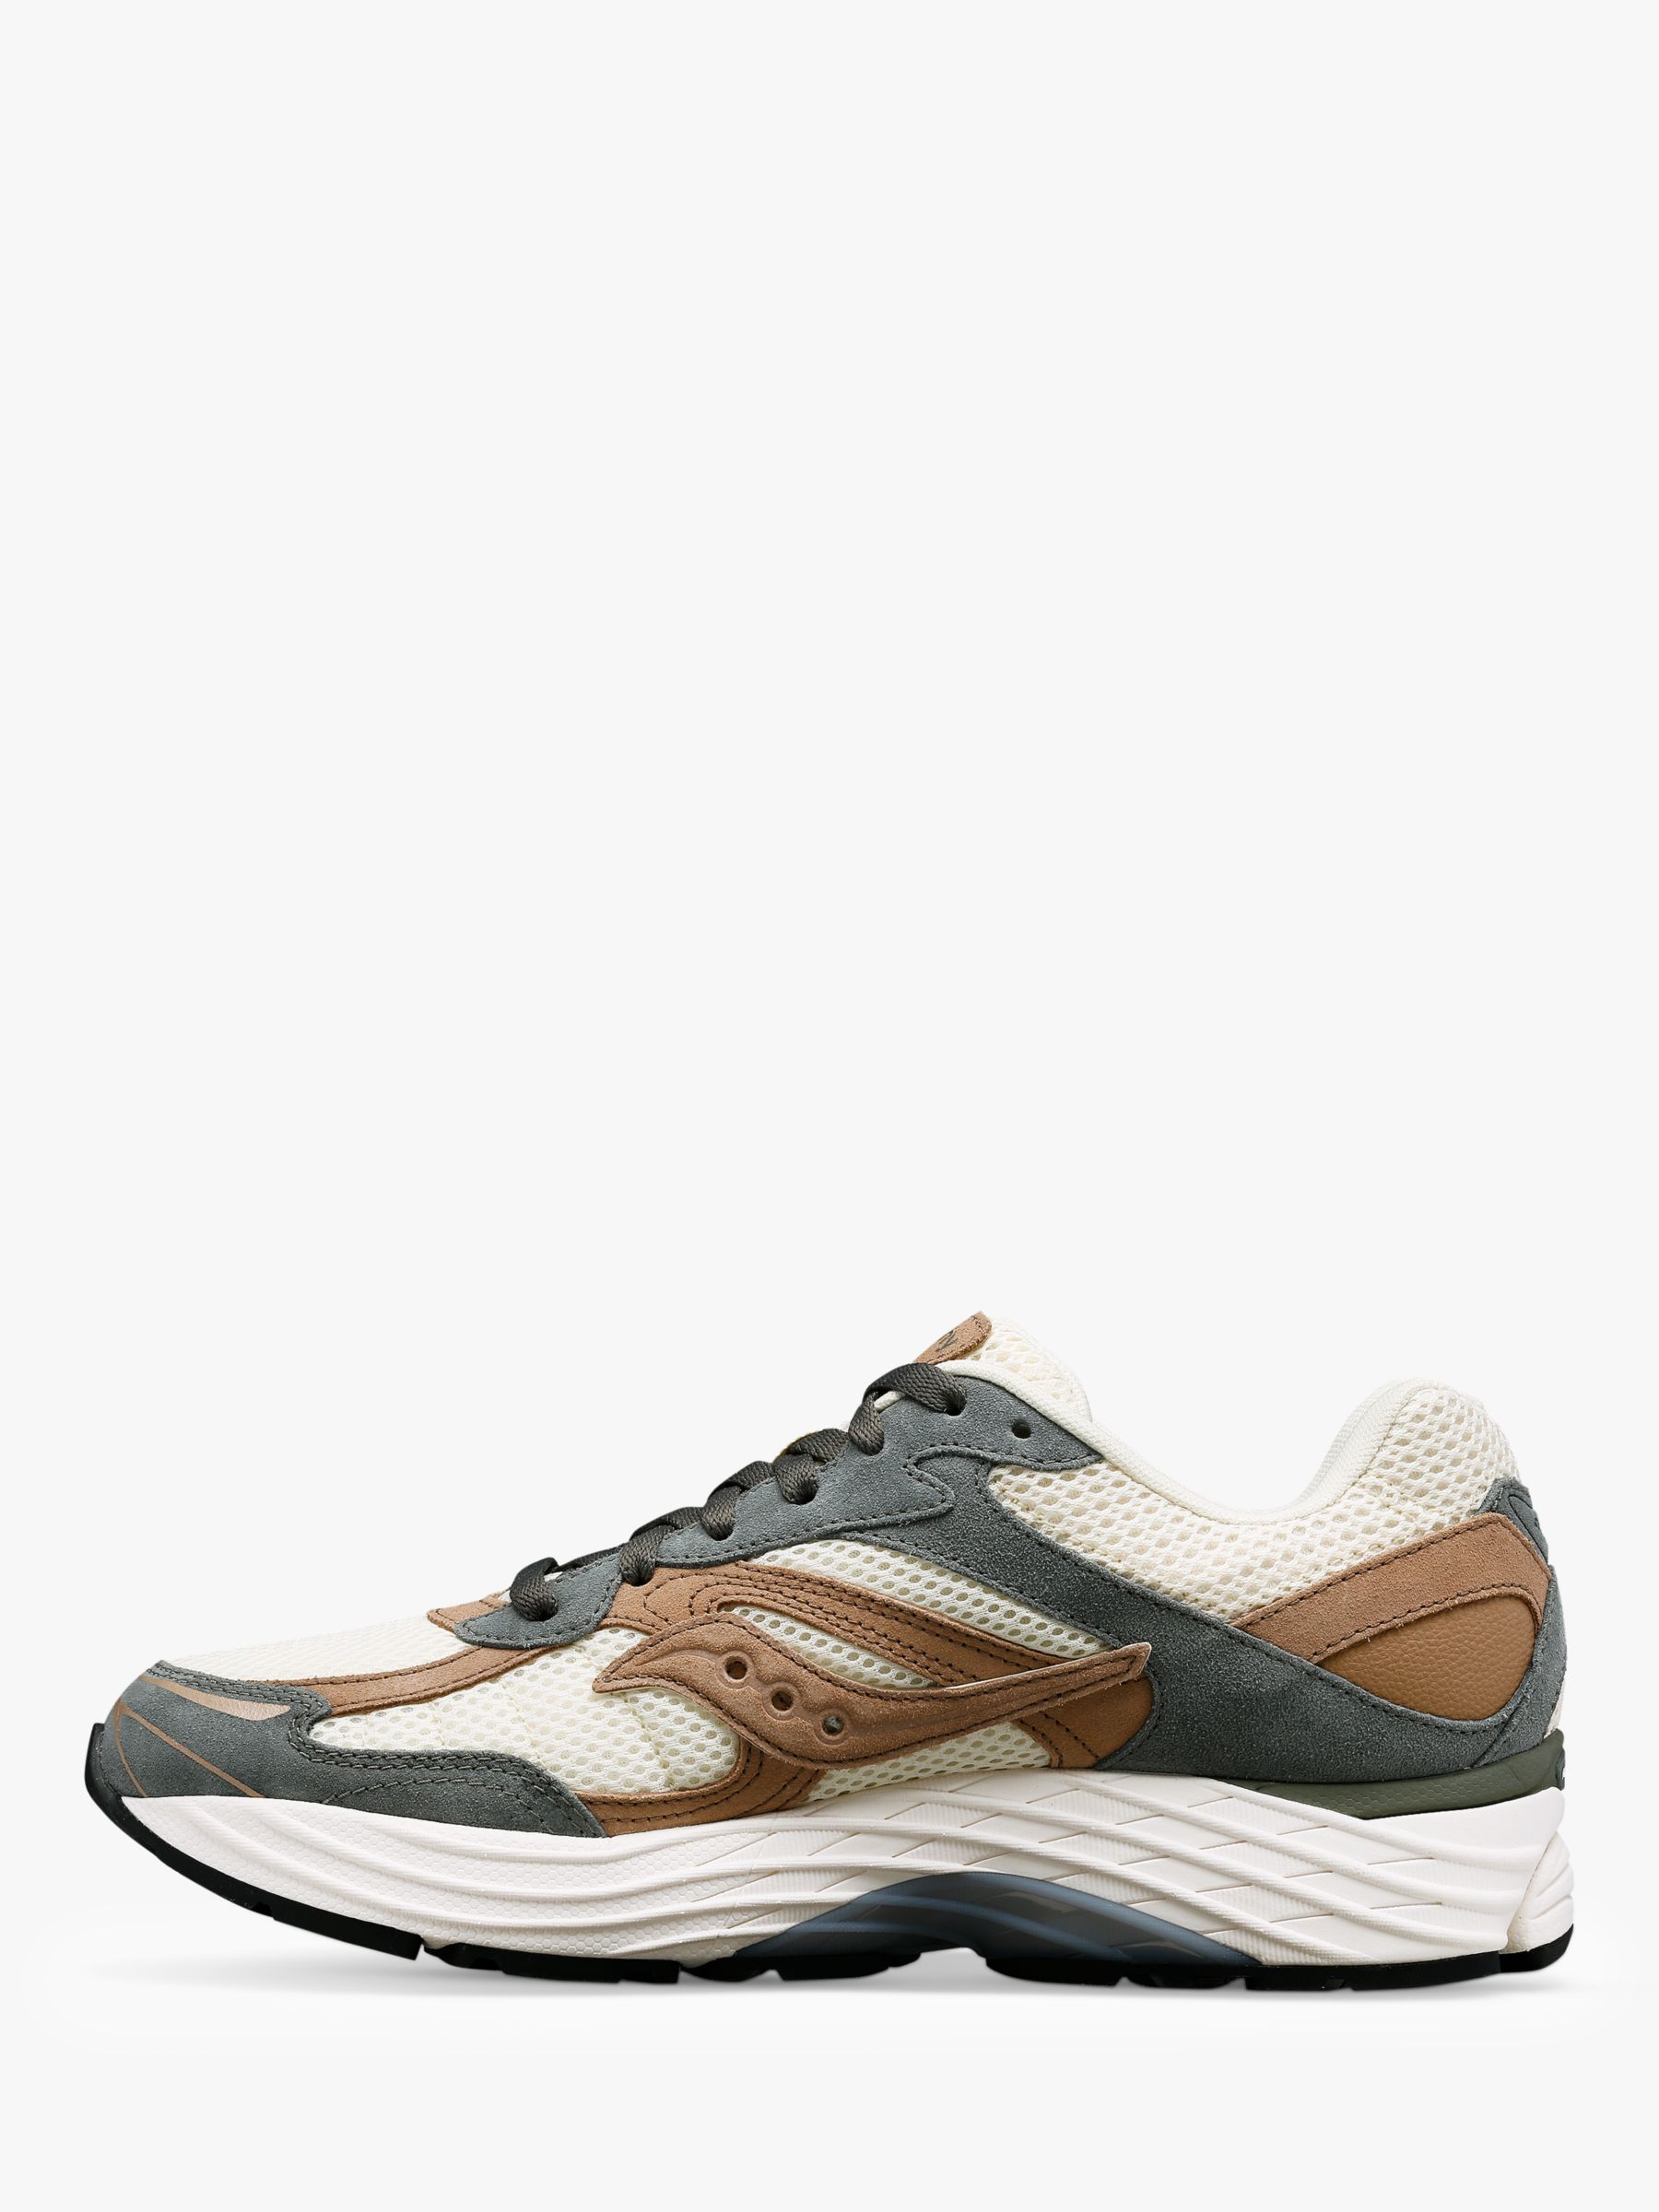 Buy Saucony Progrid Omni 9 Lace Up Trainers Online at johnlewis.com